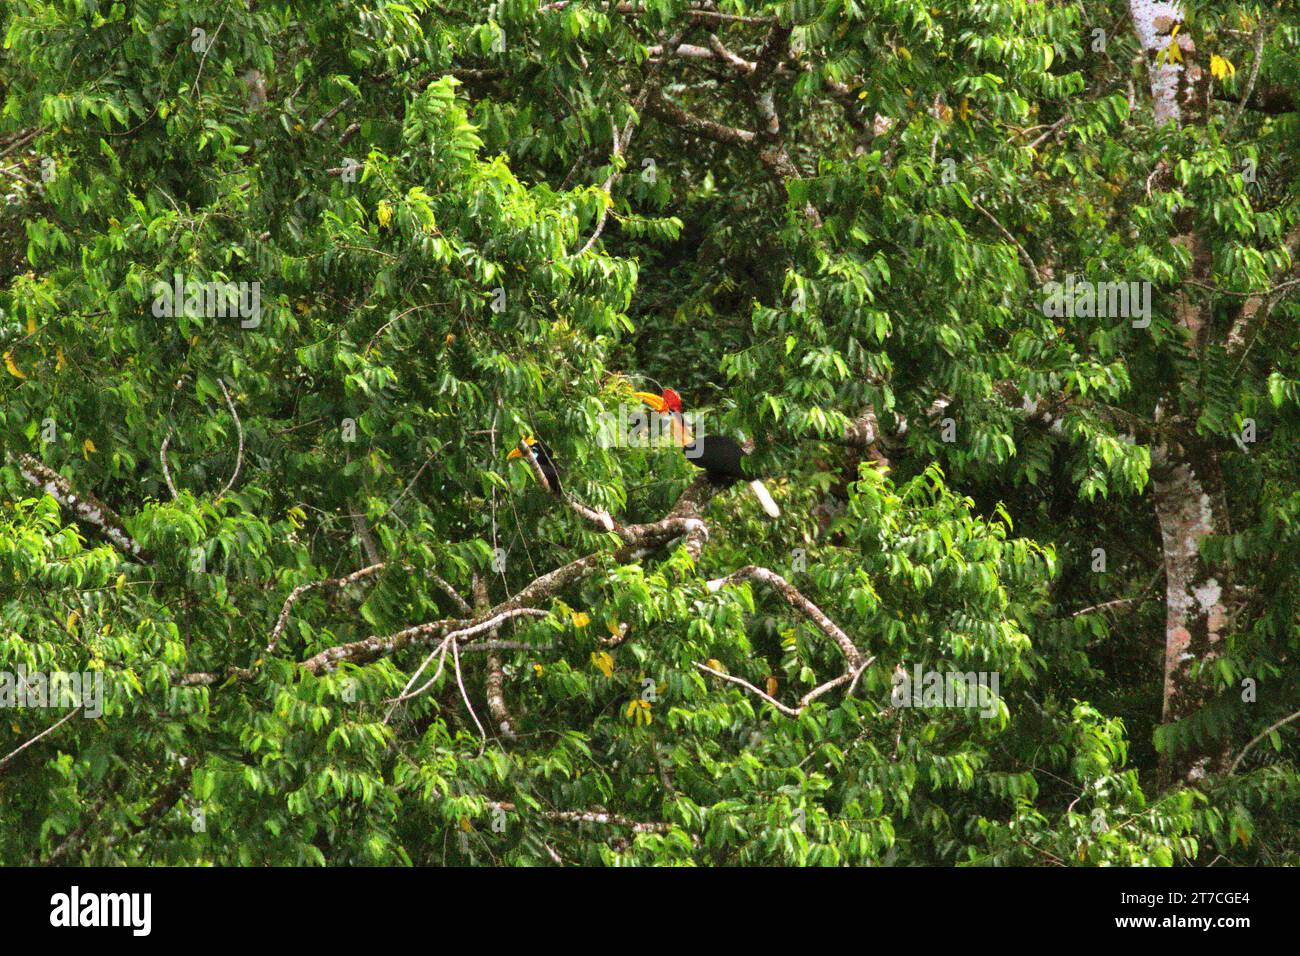 A pair of knobbed hornbills (Rhyticeros cassidix), a monogamous species with slow breeding rates, is photographed as they are foraging on a tree, in a dense vegetated landscape at the foot of Mount Tangkoko and Duasudara (Dua Saudara) in Bitung, North Sulawesi, Indonesia. Hornbill—vulnerable to hunting due the high value of their meat, casques, and tail feathers—has an important role in forest regeneration and in maintaining large trees density by its capability as a seed-dispersal agent, while at the same time a healthy rainforest is important in fighting global warming by its... Stock Photo